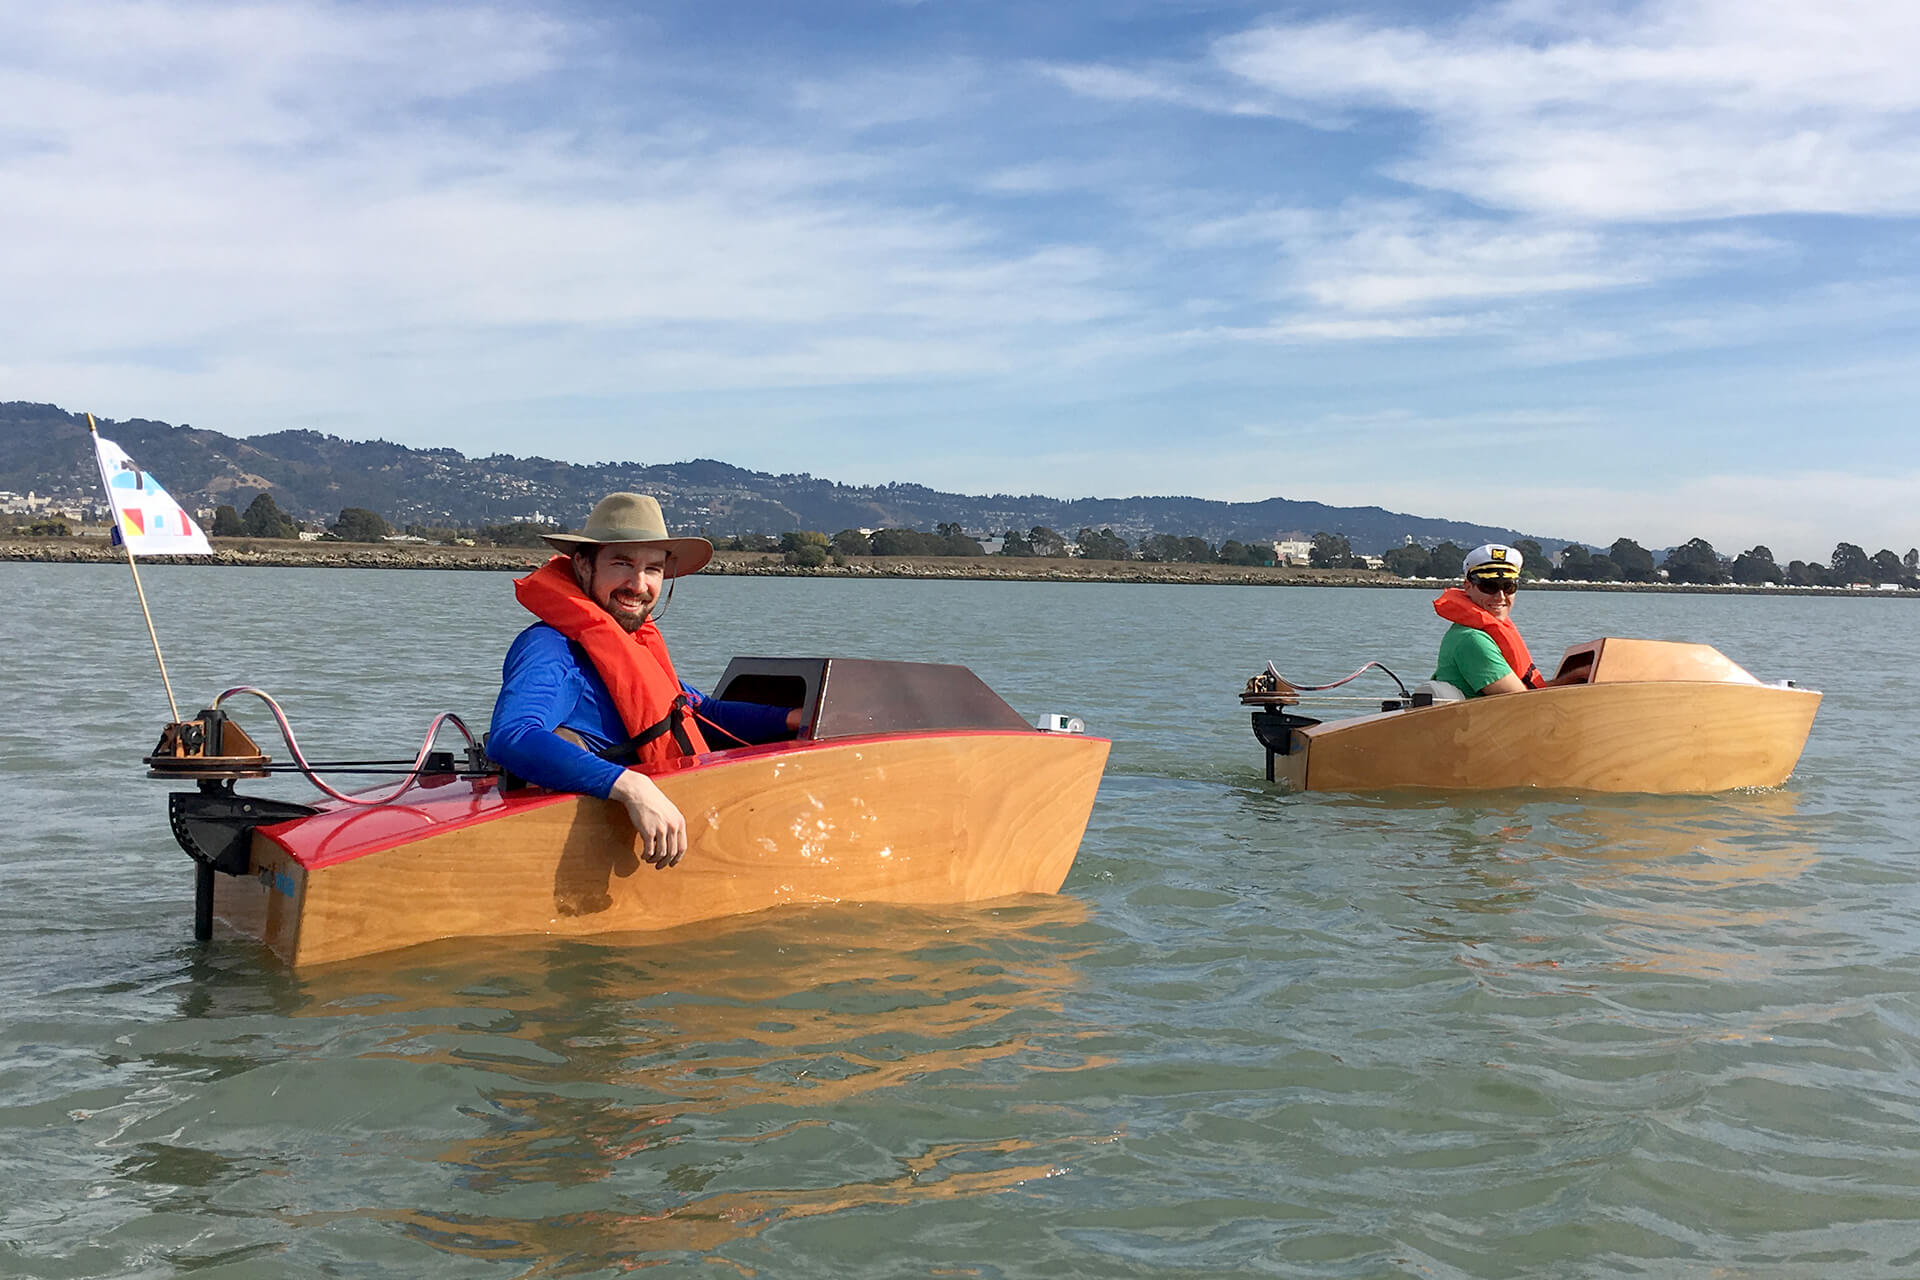 Josh and Dylan in their mini boats in berkeley